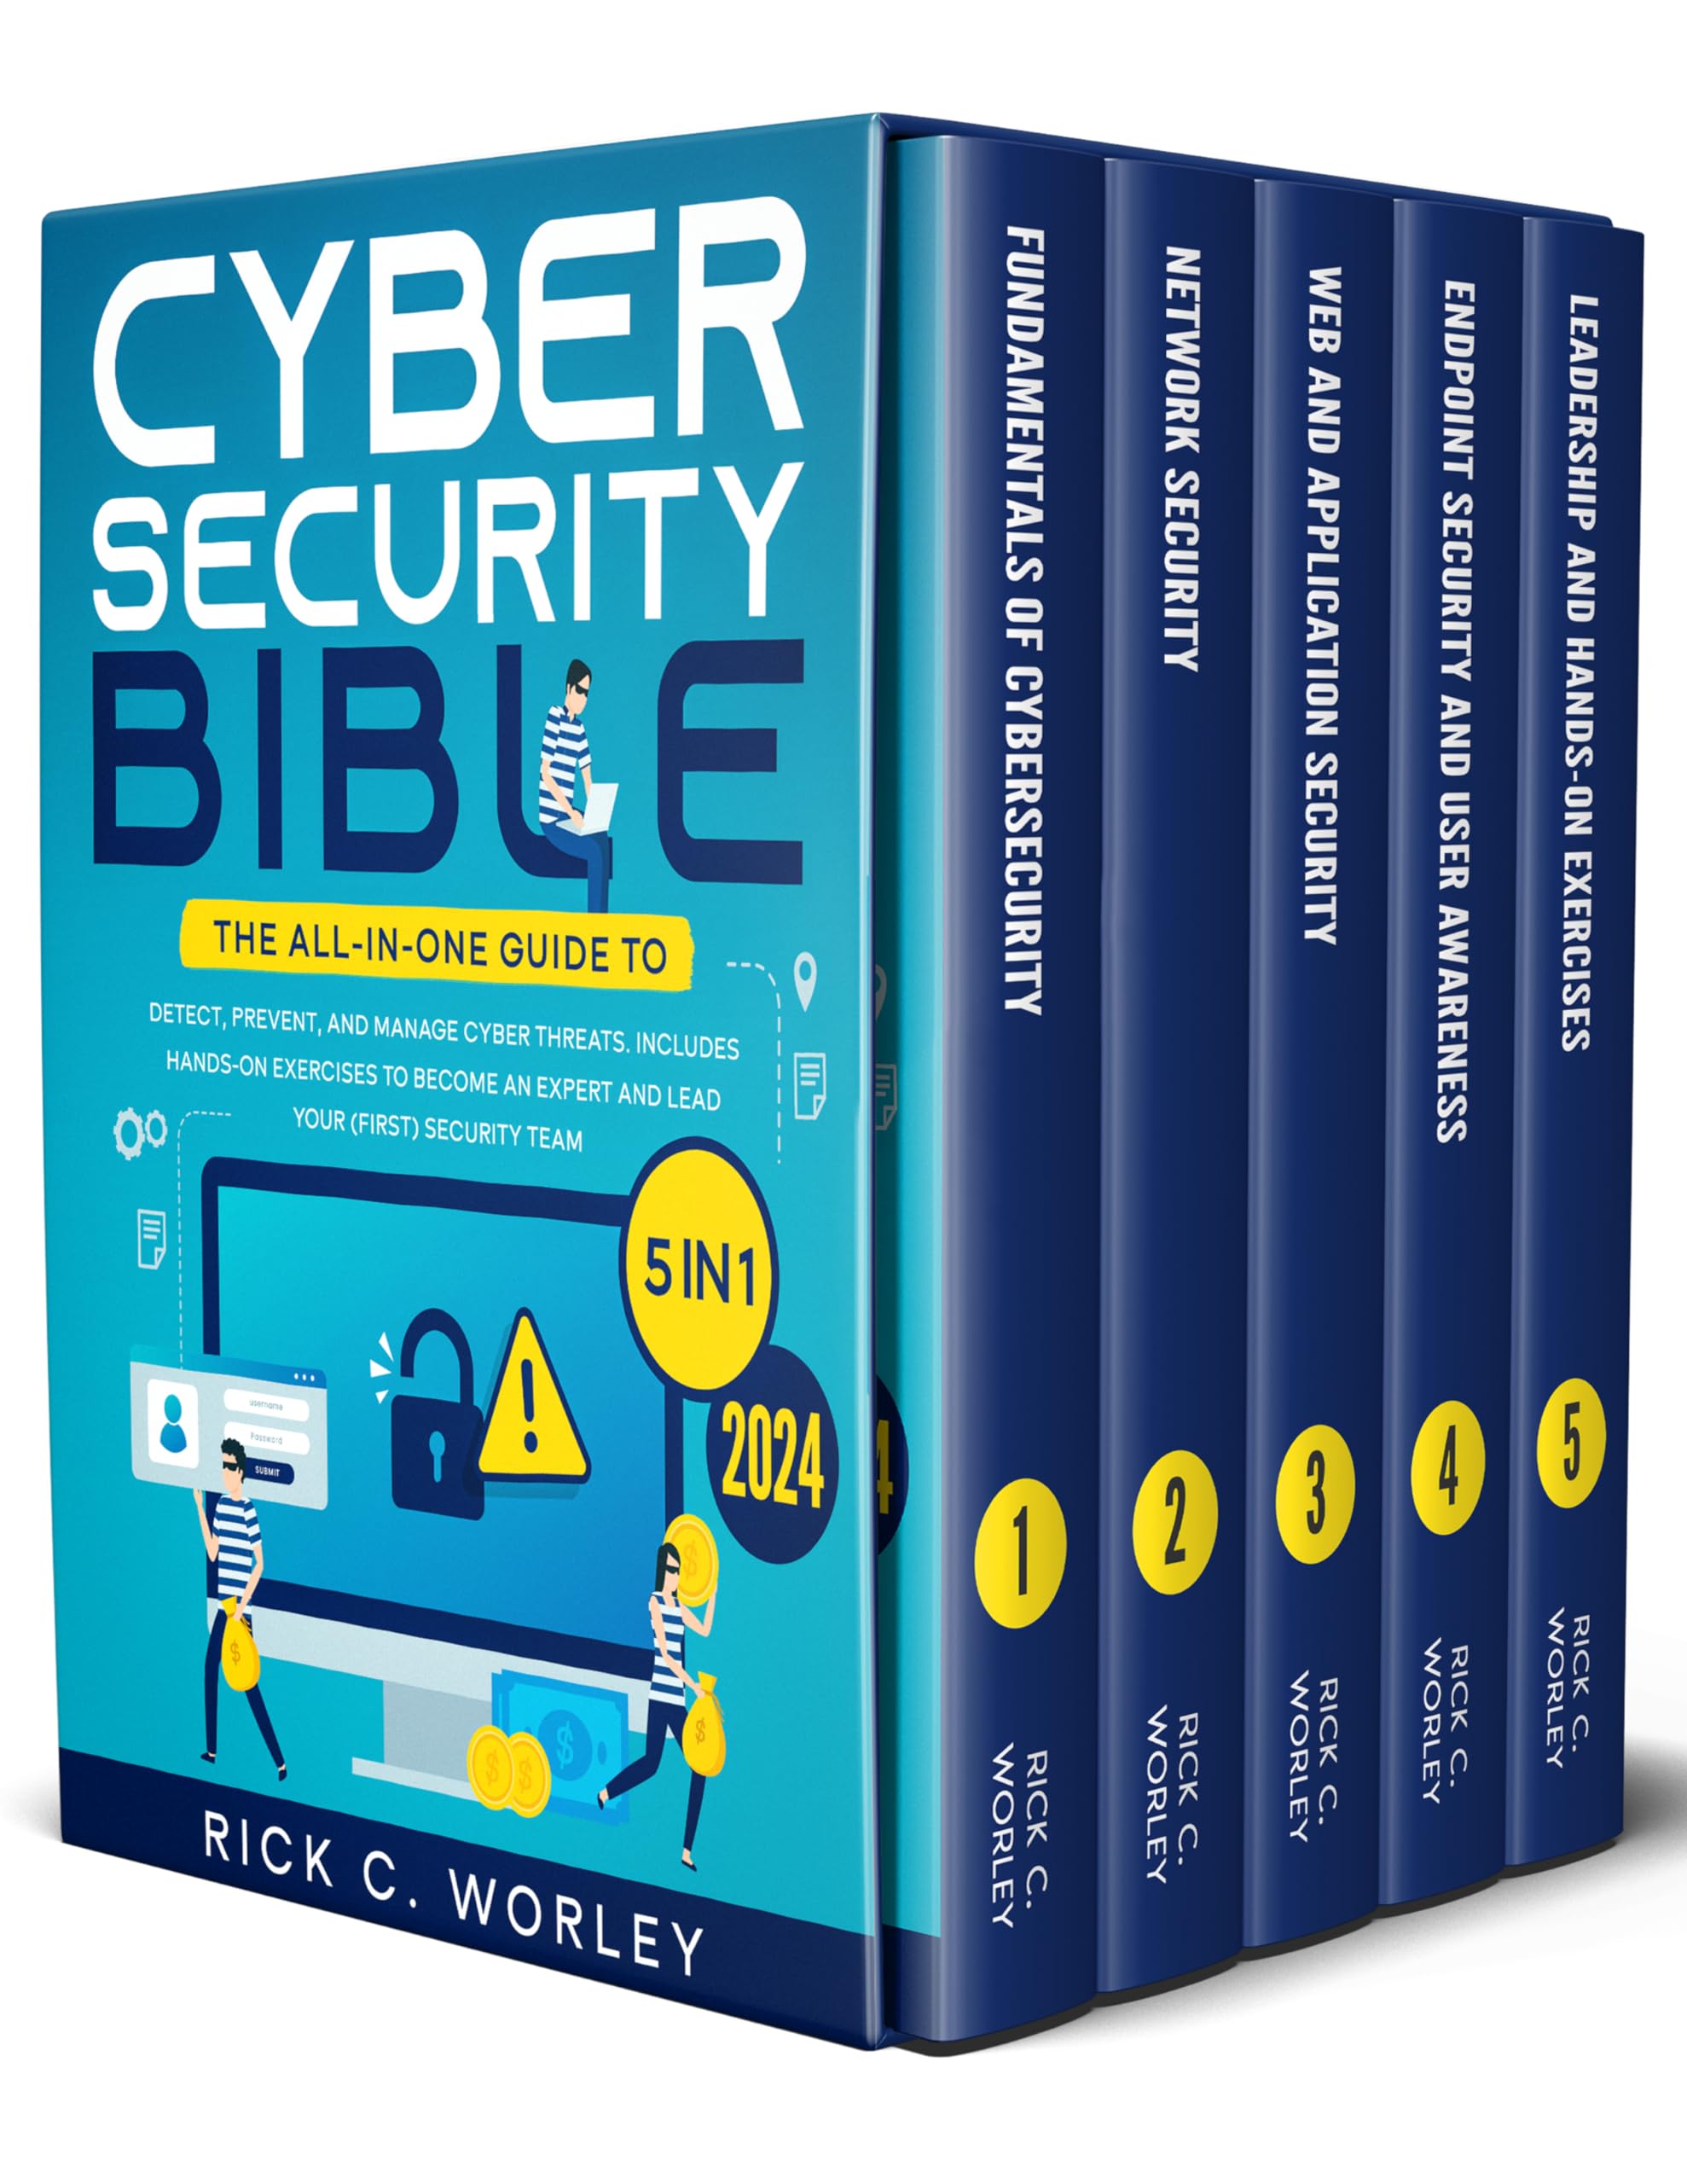 The Cybersecurity Bible: [5 in 1] The All-In-One Guide to Detect, Prevent, and Manage Cyber Threats. Includes Hands-On Exercises to Become an Expert and Lead Your (First) Security Team